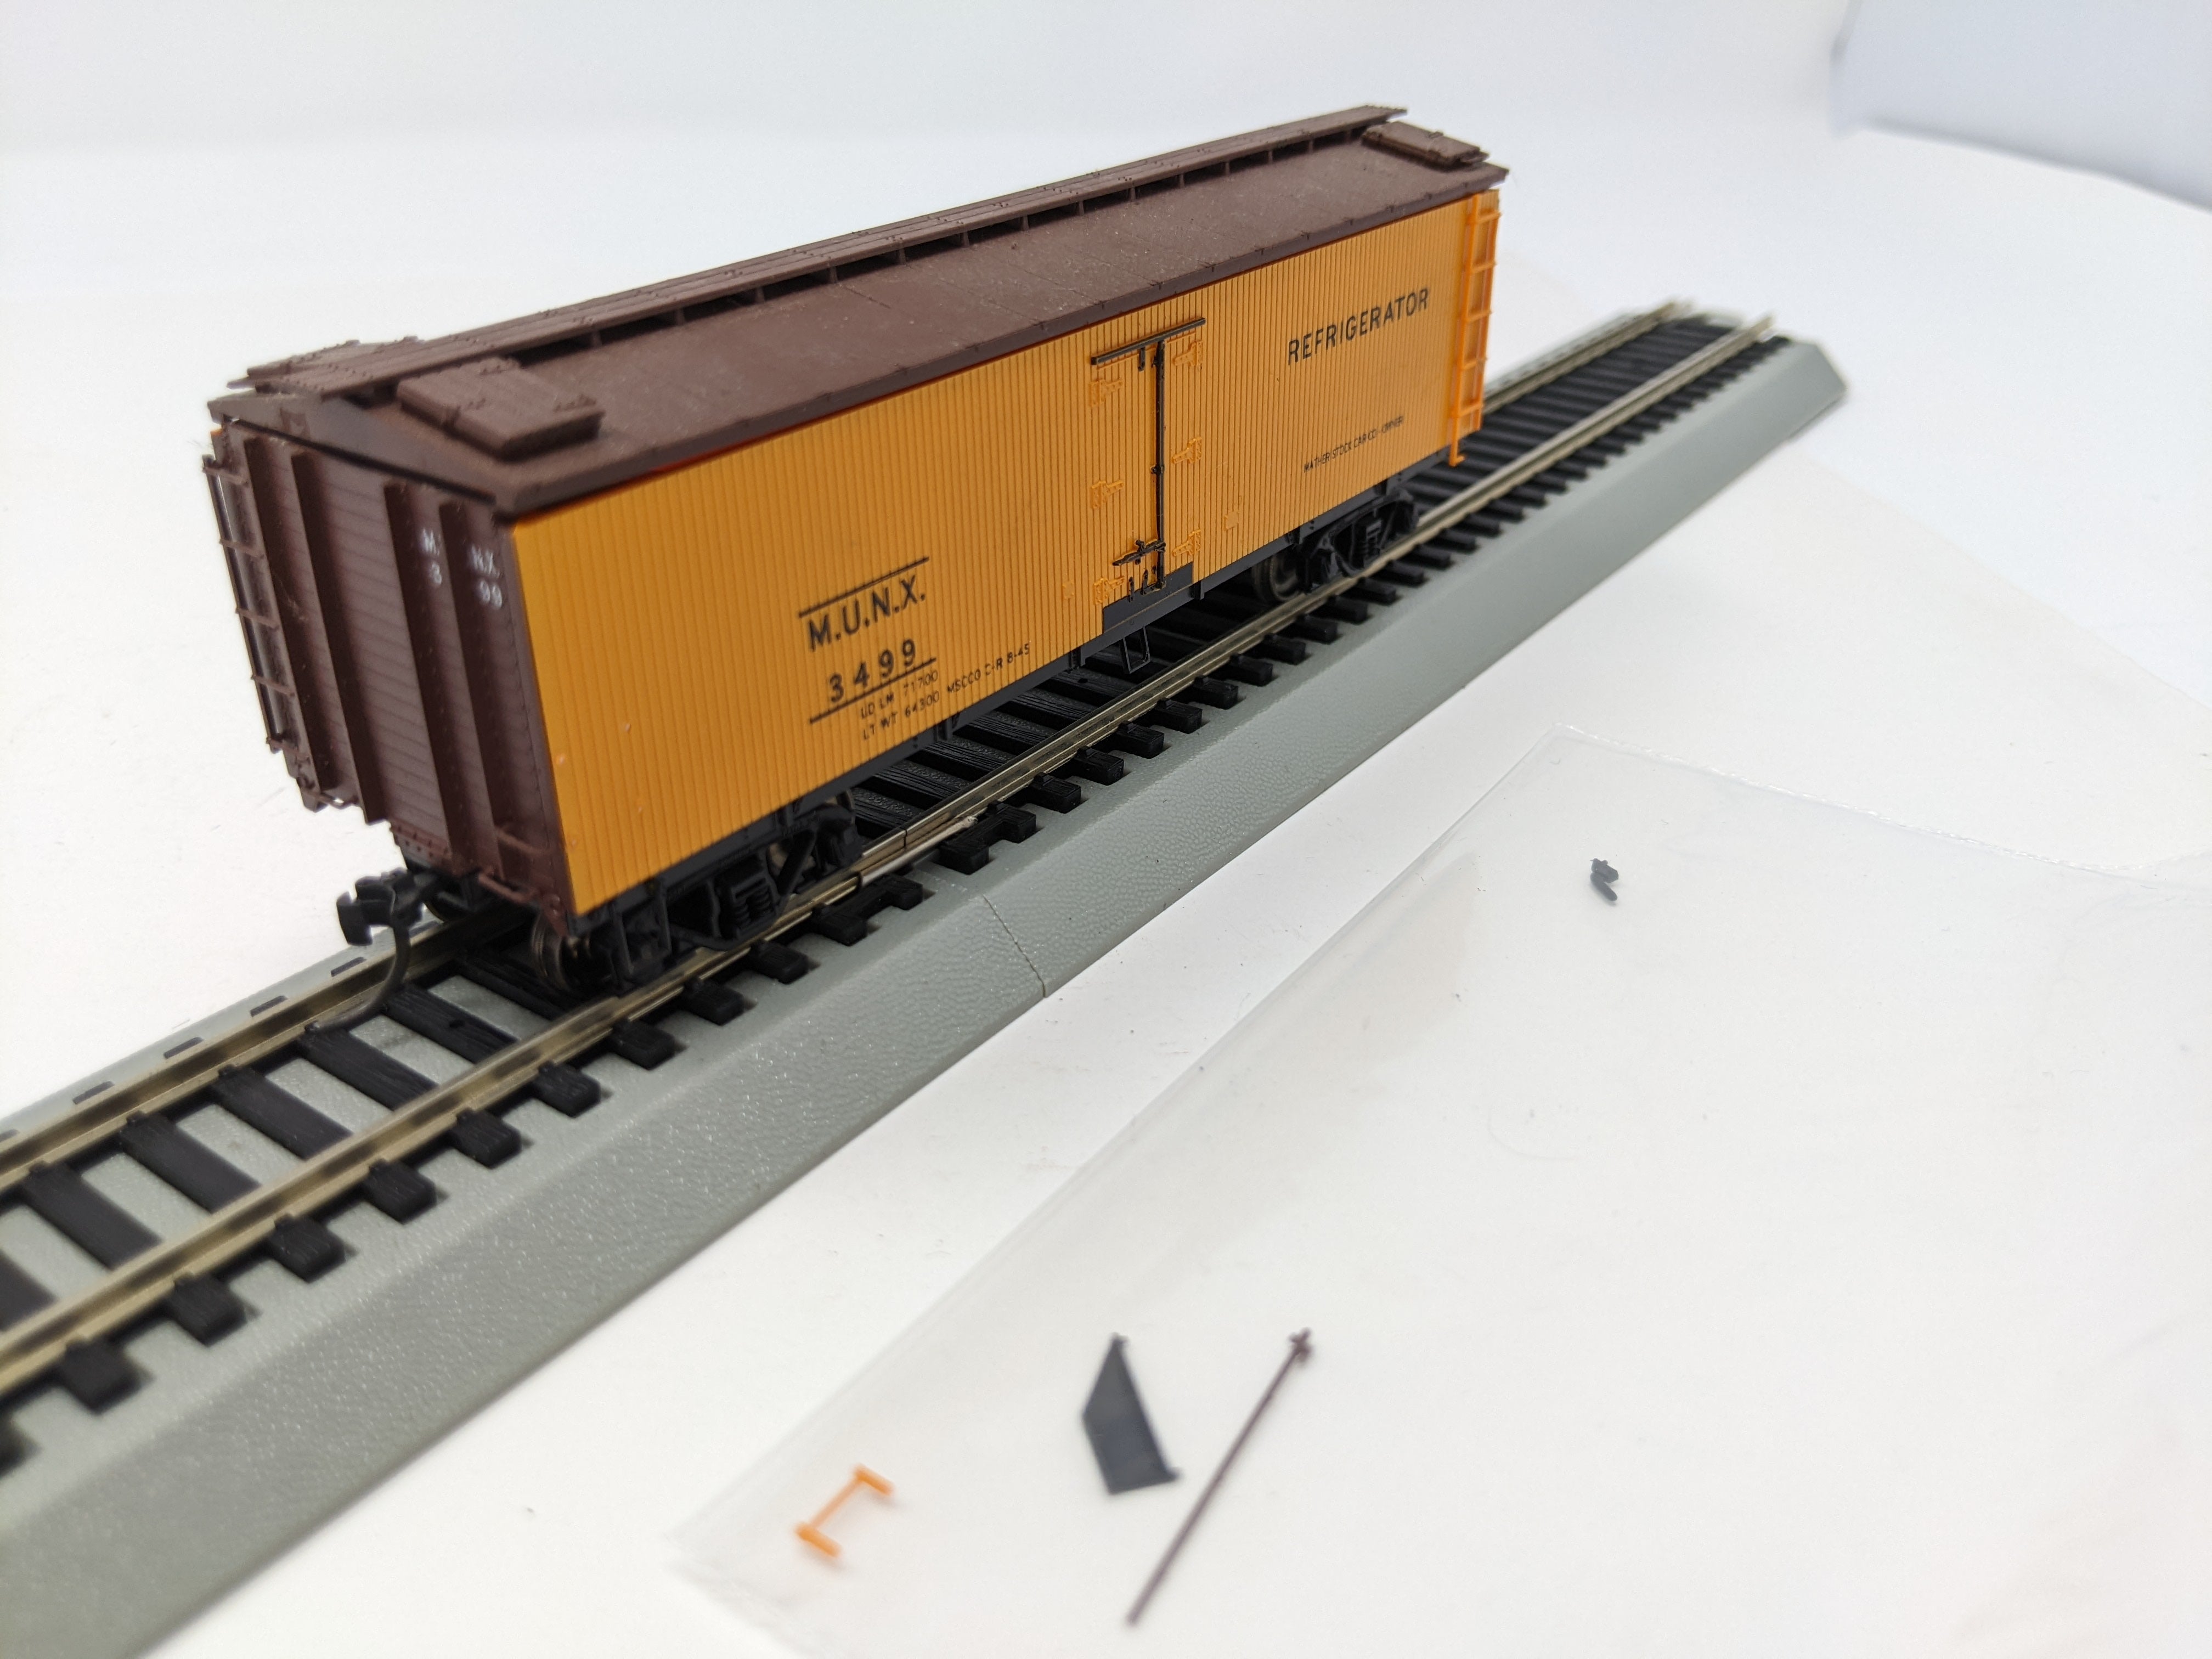 USED HO Scale, 37' Wooden Reefer Box Car, Mather Stock Car Co MUNX #3499, Read Description